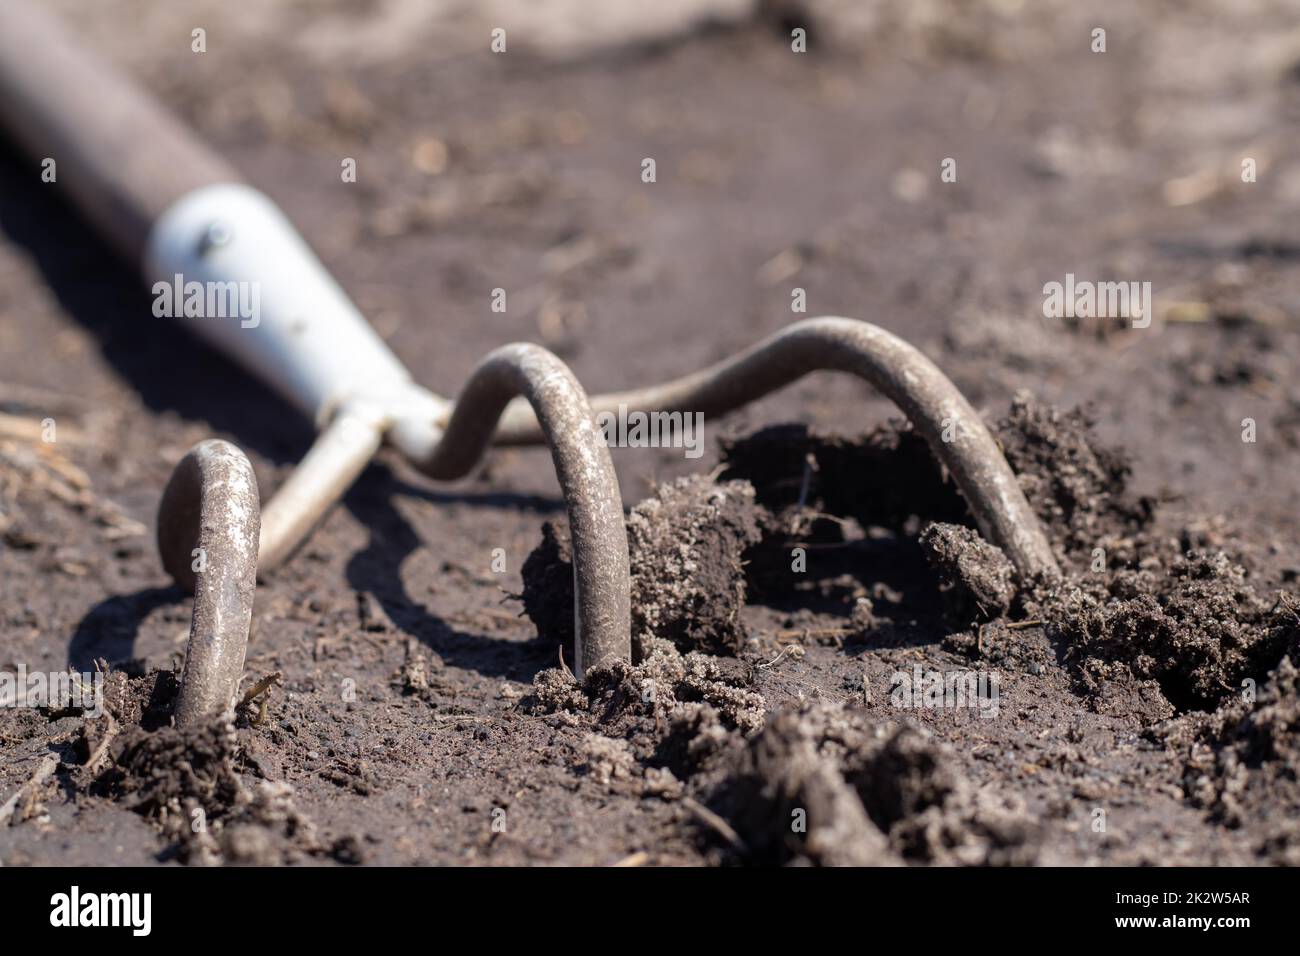 A small dusty rake used in home gardens. Garden tools for gardening and care of plants at home and in the garden. Spring or summer garden work. Dig up a piece of land among the weeds. Stock Photo